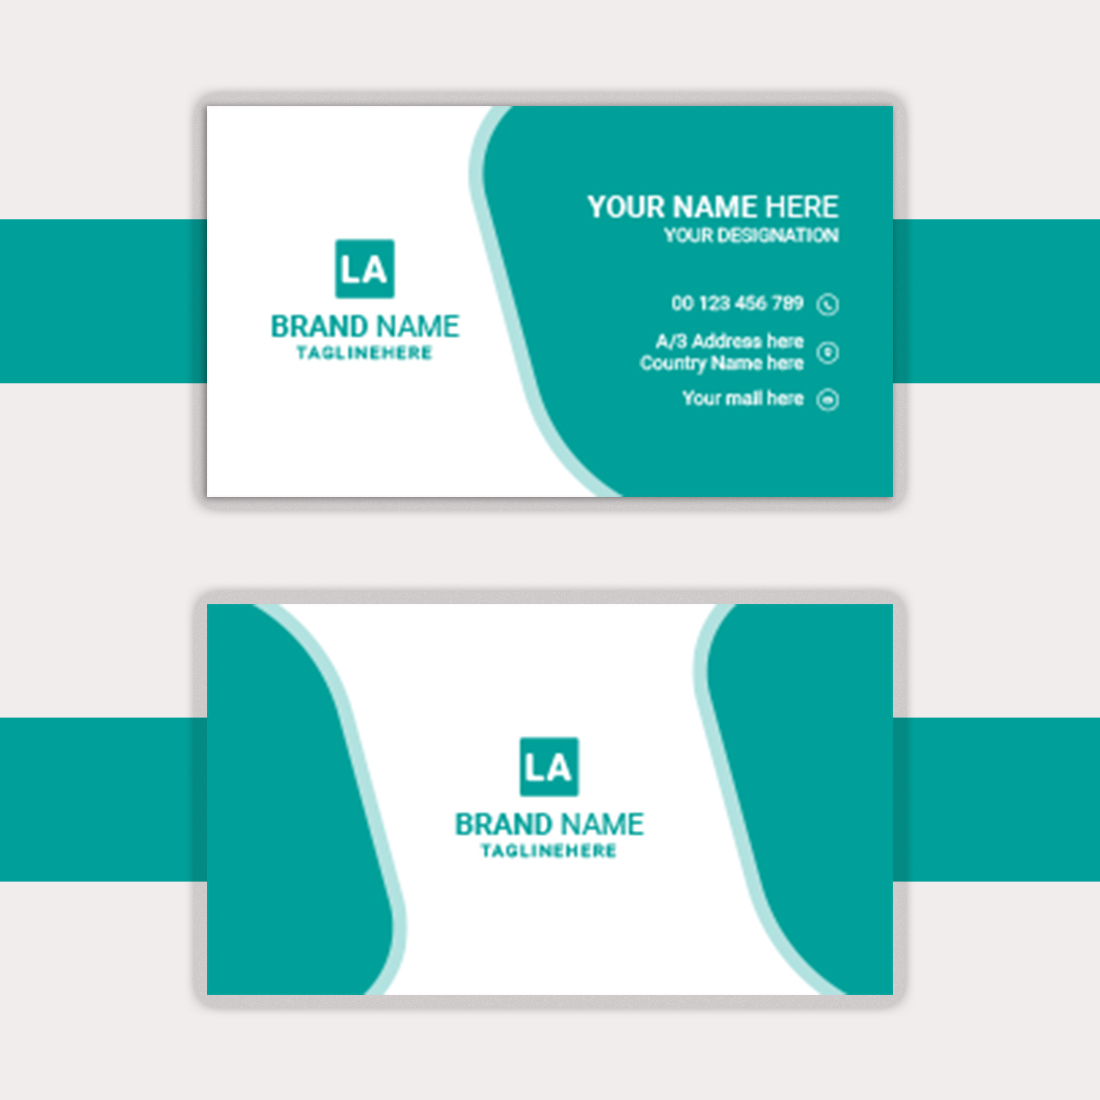 Business card design template preview image.